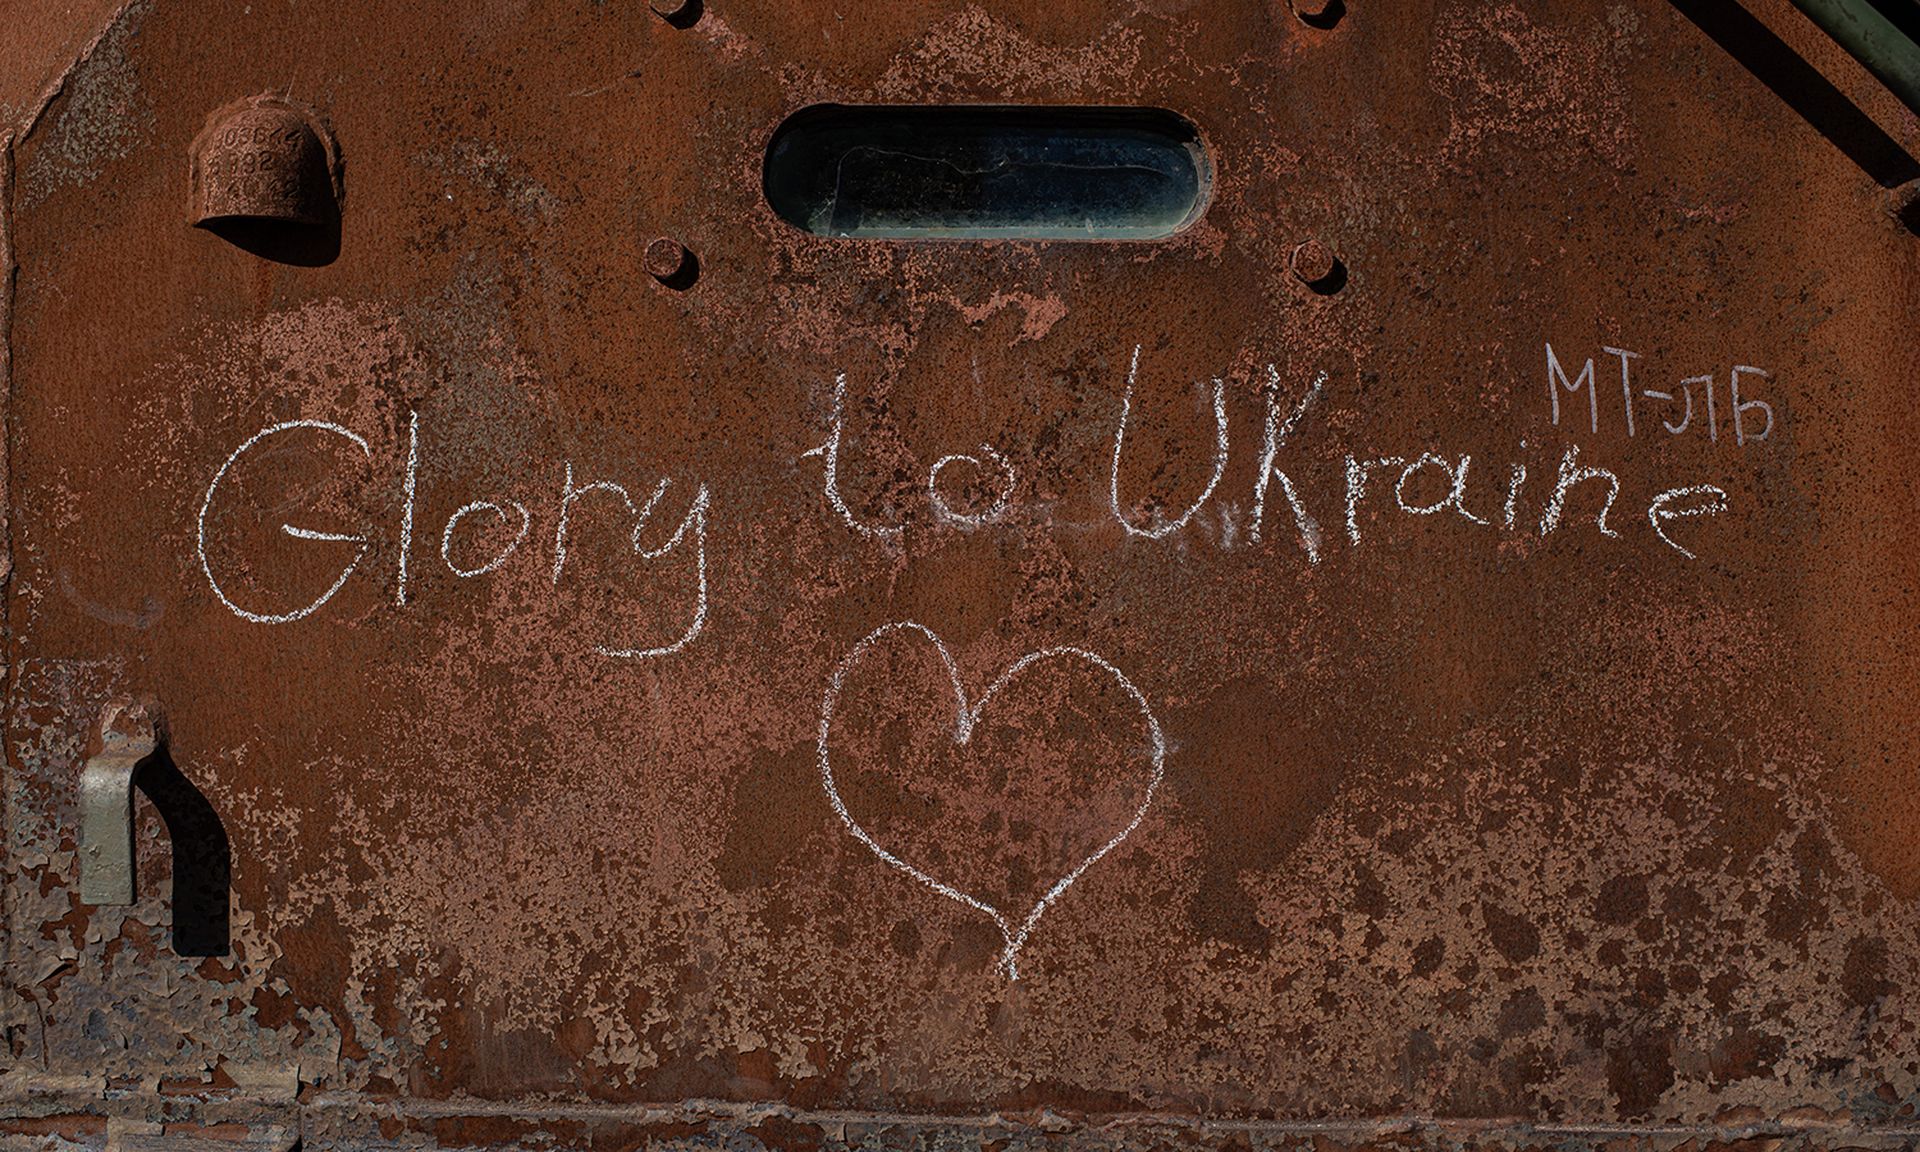 The words "Glory to Ukraine" are written in chalk on a burnt Russian military vehicle in Kyiv.